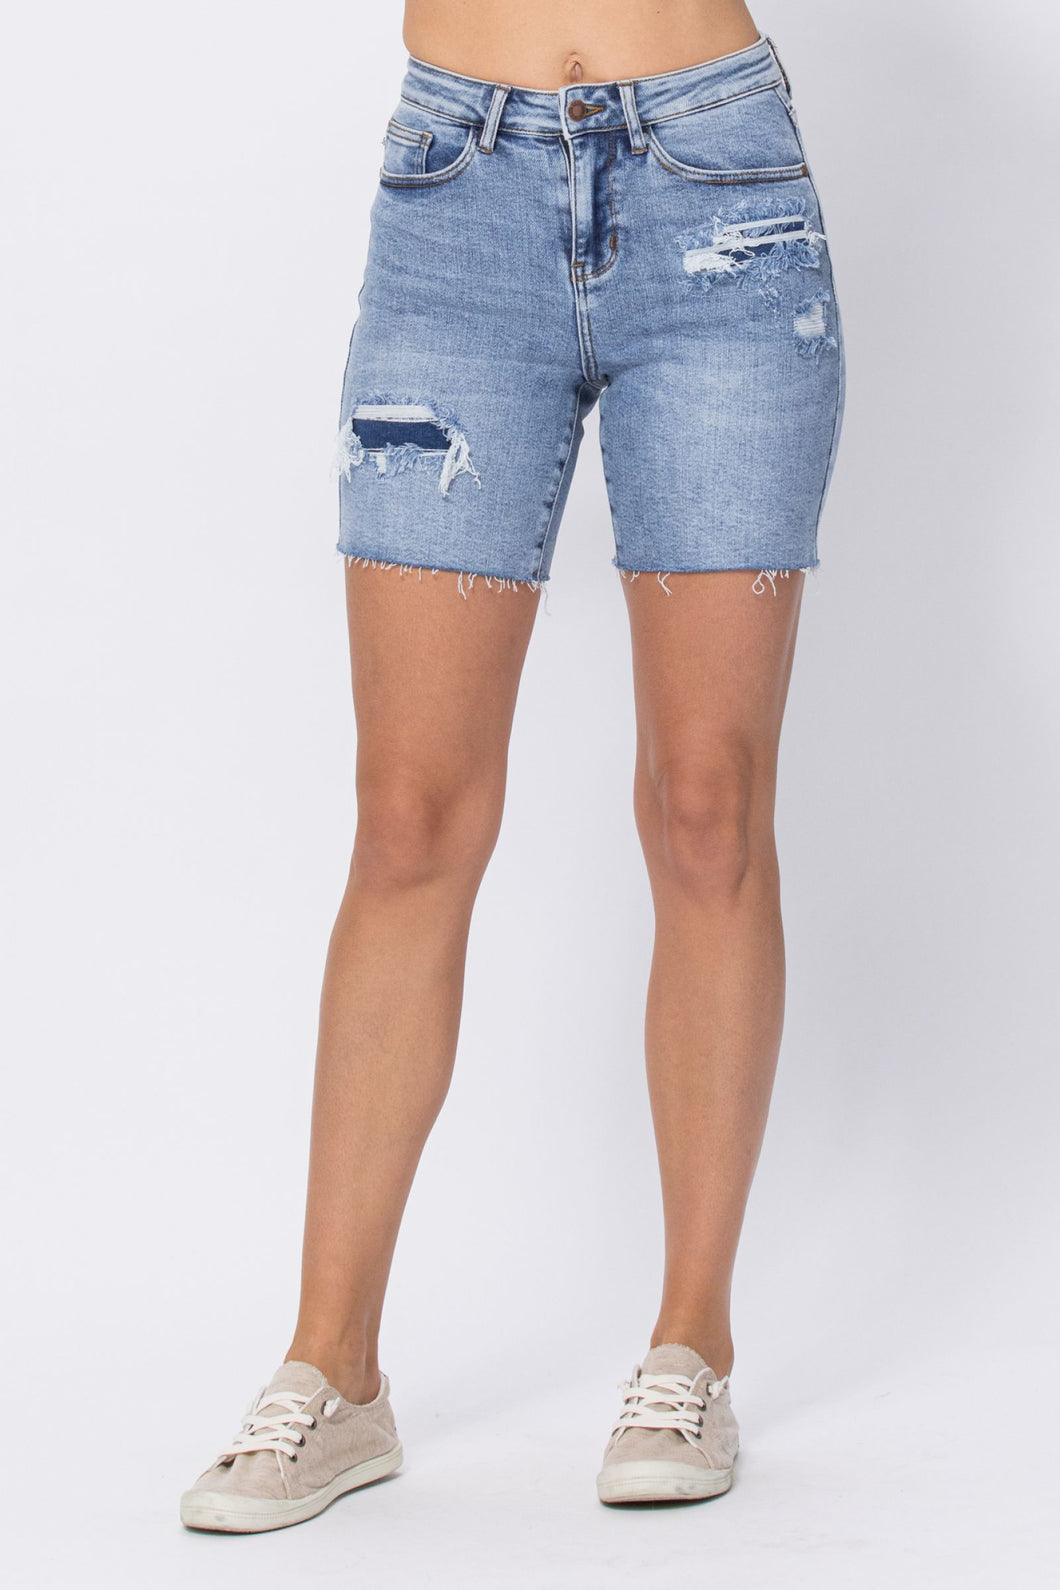 JUDY BLUE Mid Length Patch Shorts